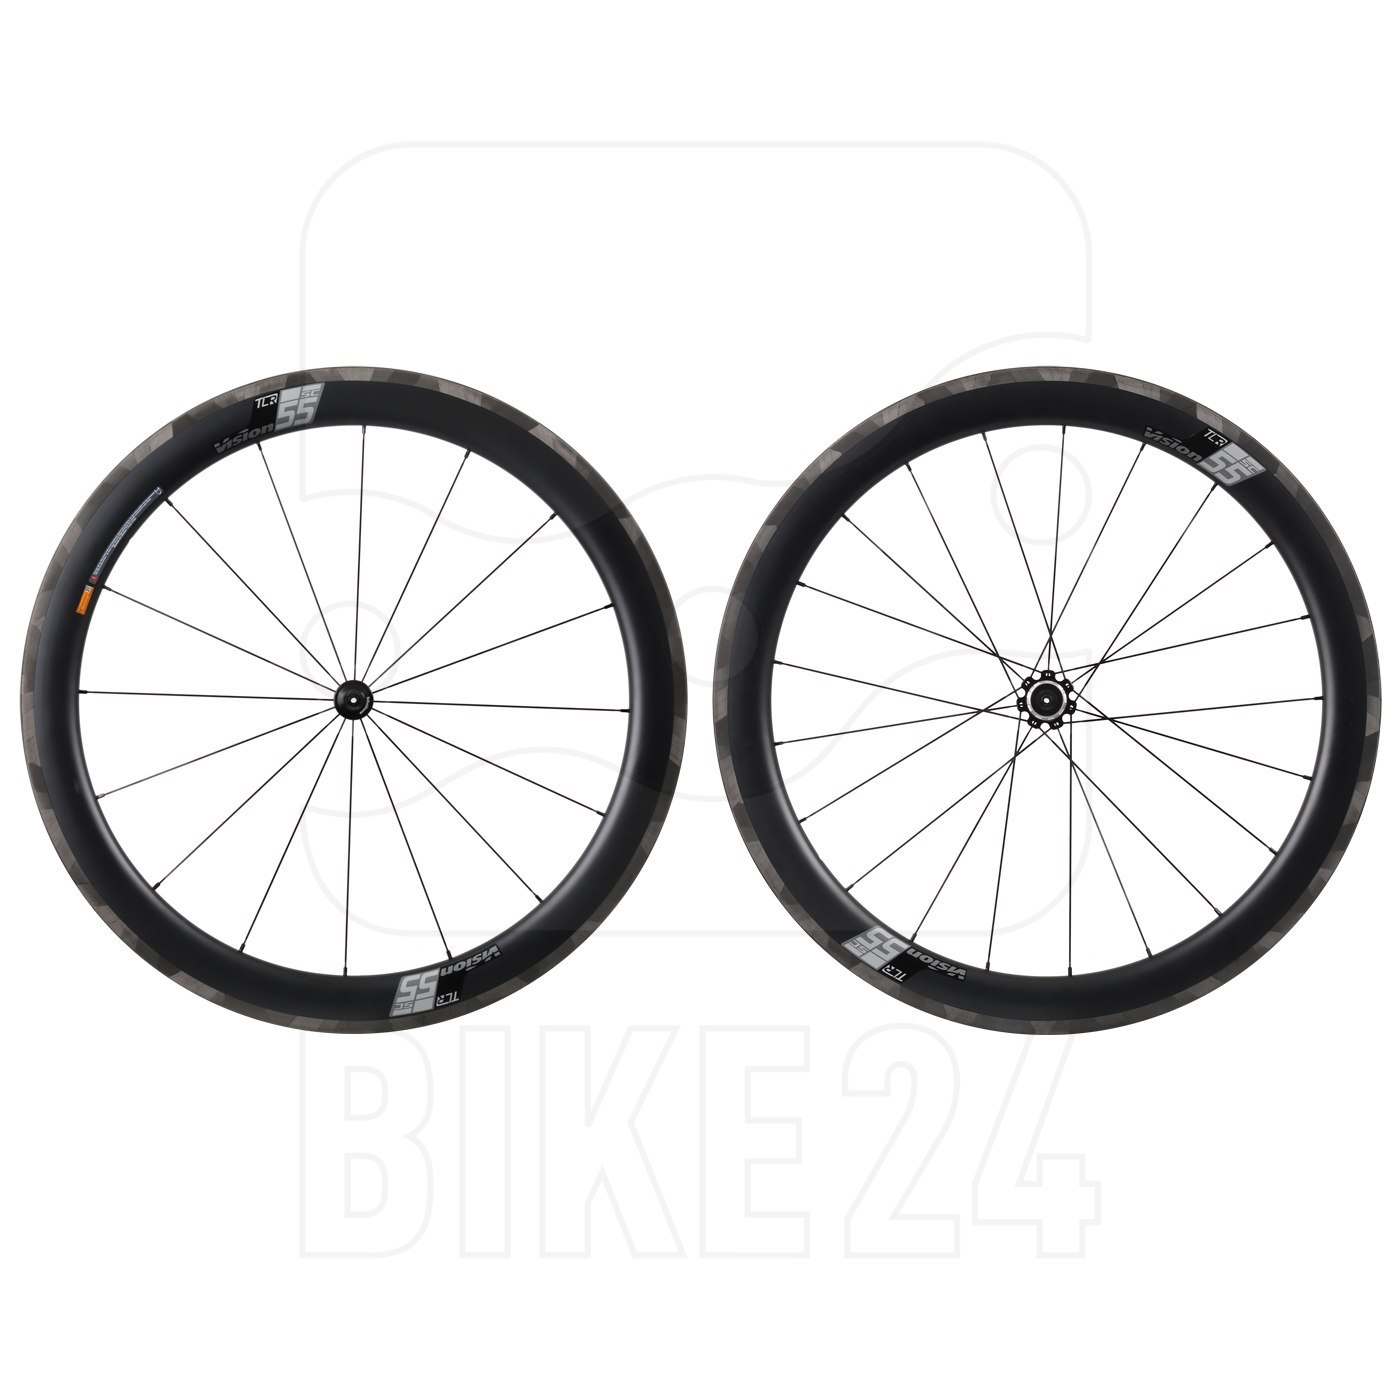 Picture of Vision SC 55 Carbon Wheelset - Tubeless Ready - Clincher - QR - black